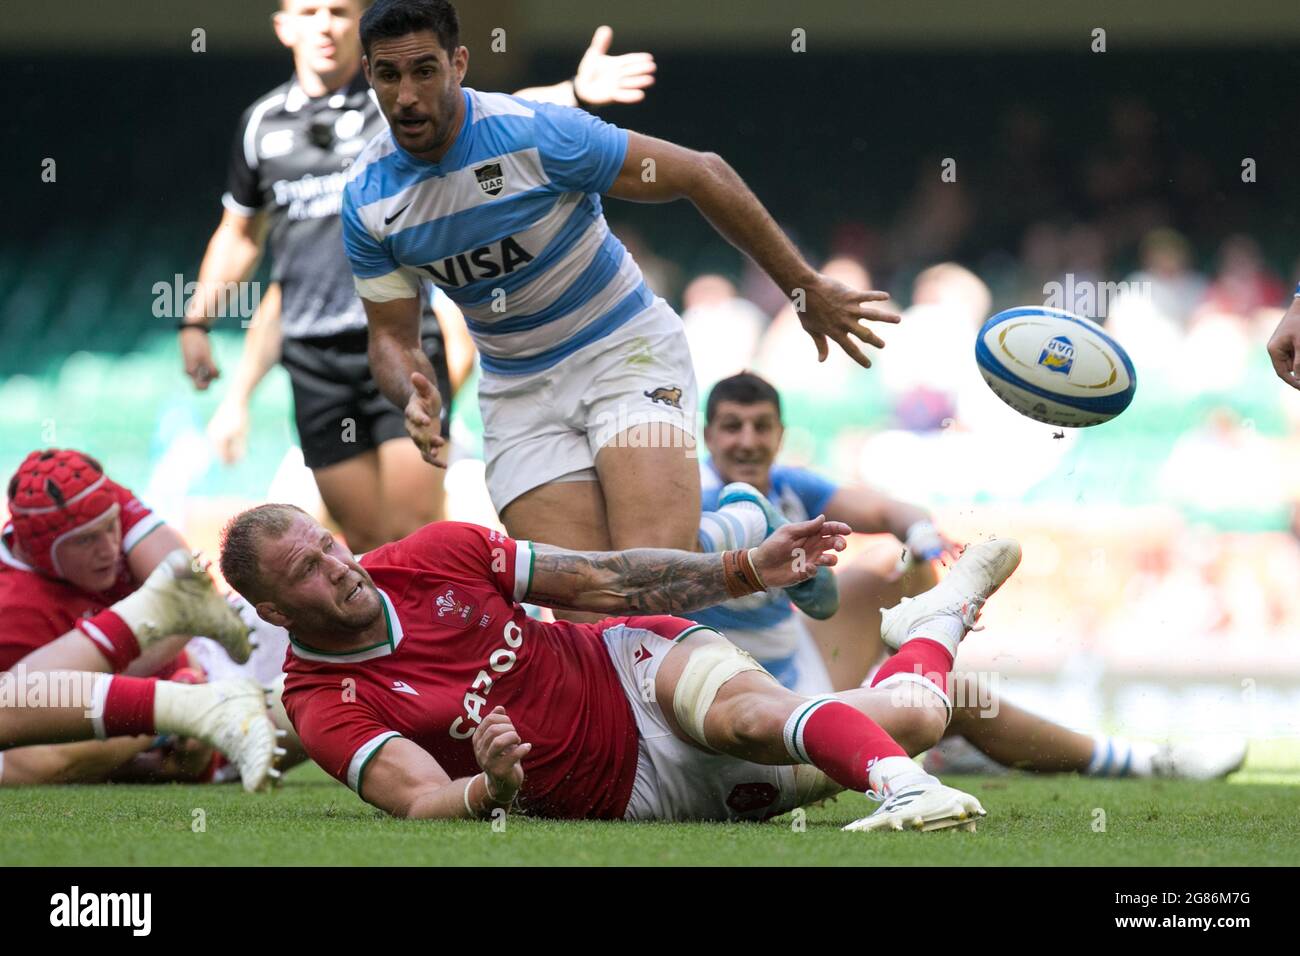 Cardiff, UK. 17th July, 2021. Cardiff, UK. July 17th : Ross Moriarty (Wales) controls the ball during the 2021 Summer Internationals match between Wales and Argentina at Principality Stadium. Credit: Federico Guerra Morán/Alamy Live News Stock Photo